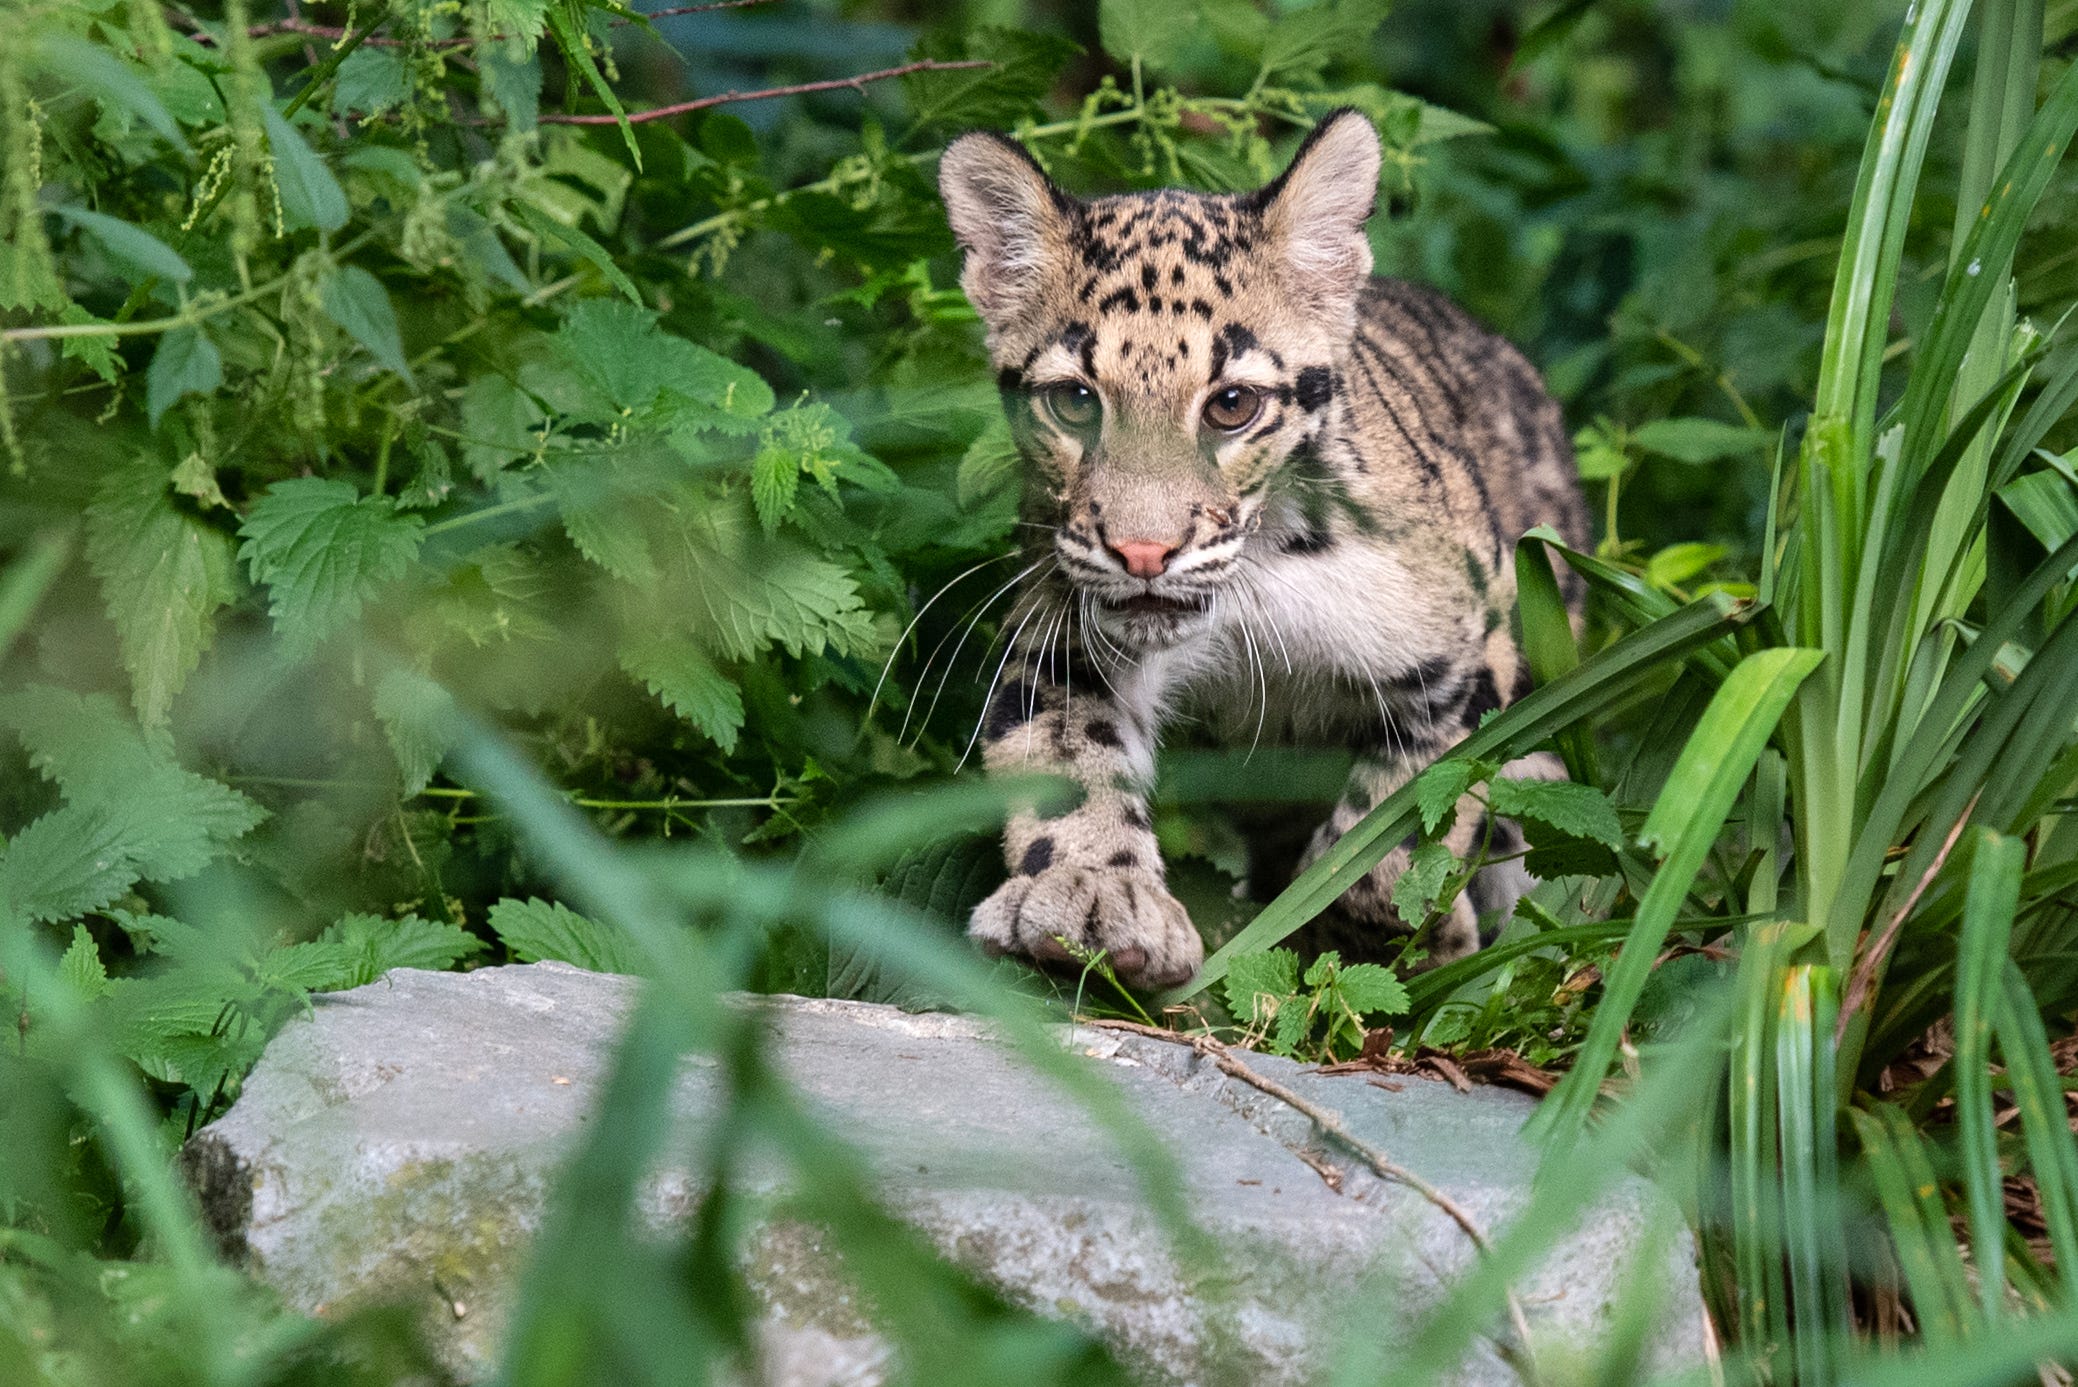 Dallas Zoo shuts down as police look for escaped clouded leopard